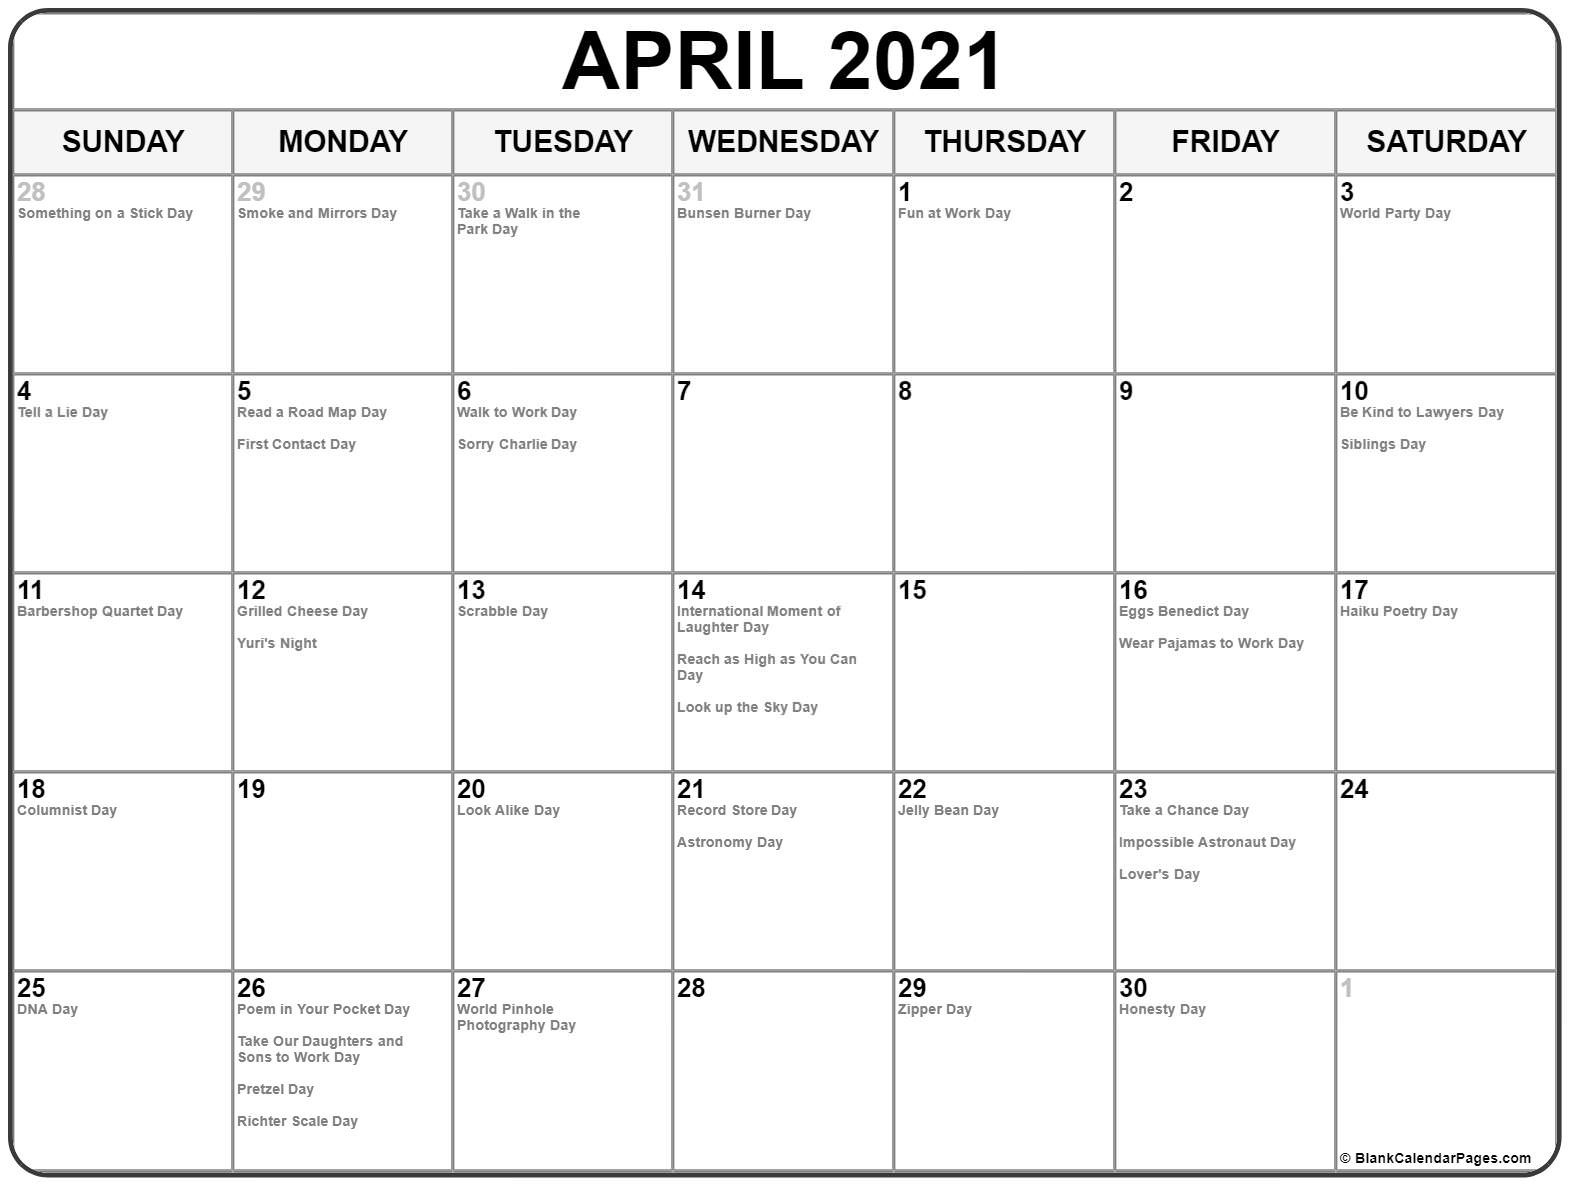 Collection Of April 2021 Calendars With Holidays-List Of Festivals 2021 To Print Out